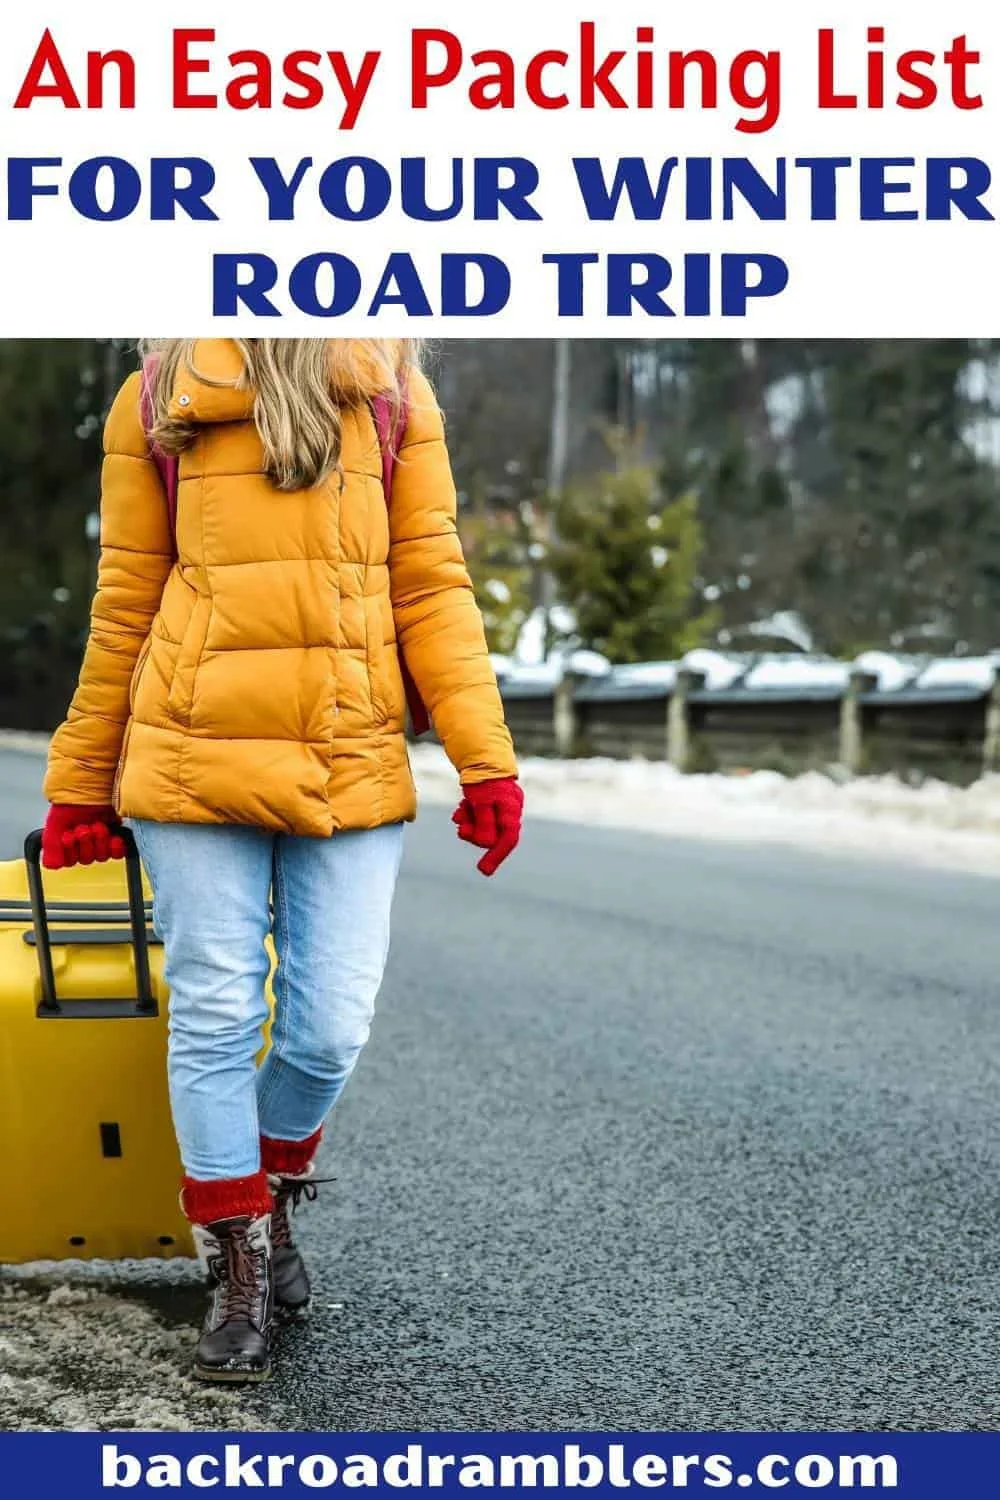 A woman with a yellow jacket pulls a yellow suitcase down the road in the winter. Text overlay: An easy packing list for your winter road trip.